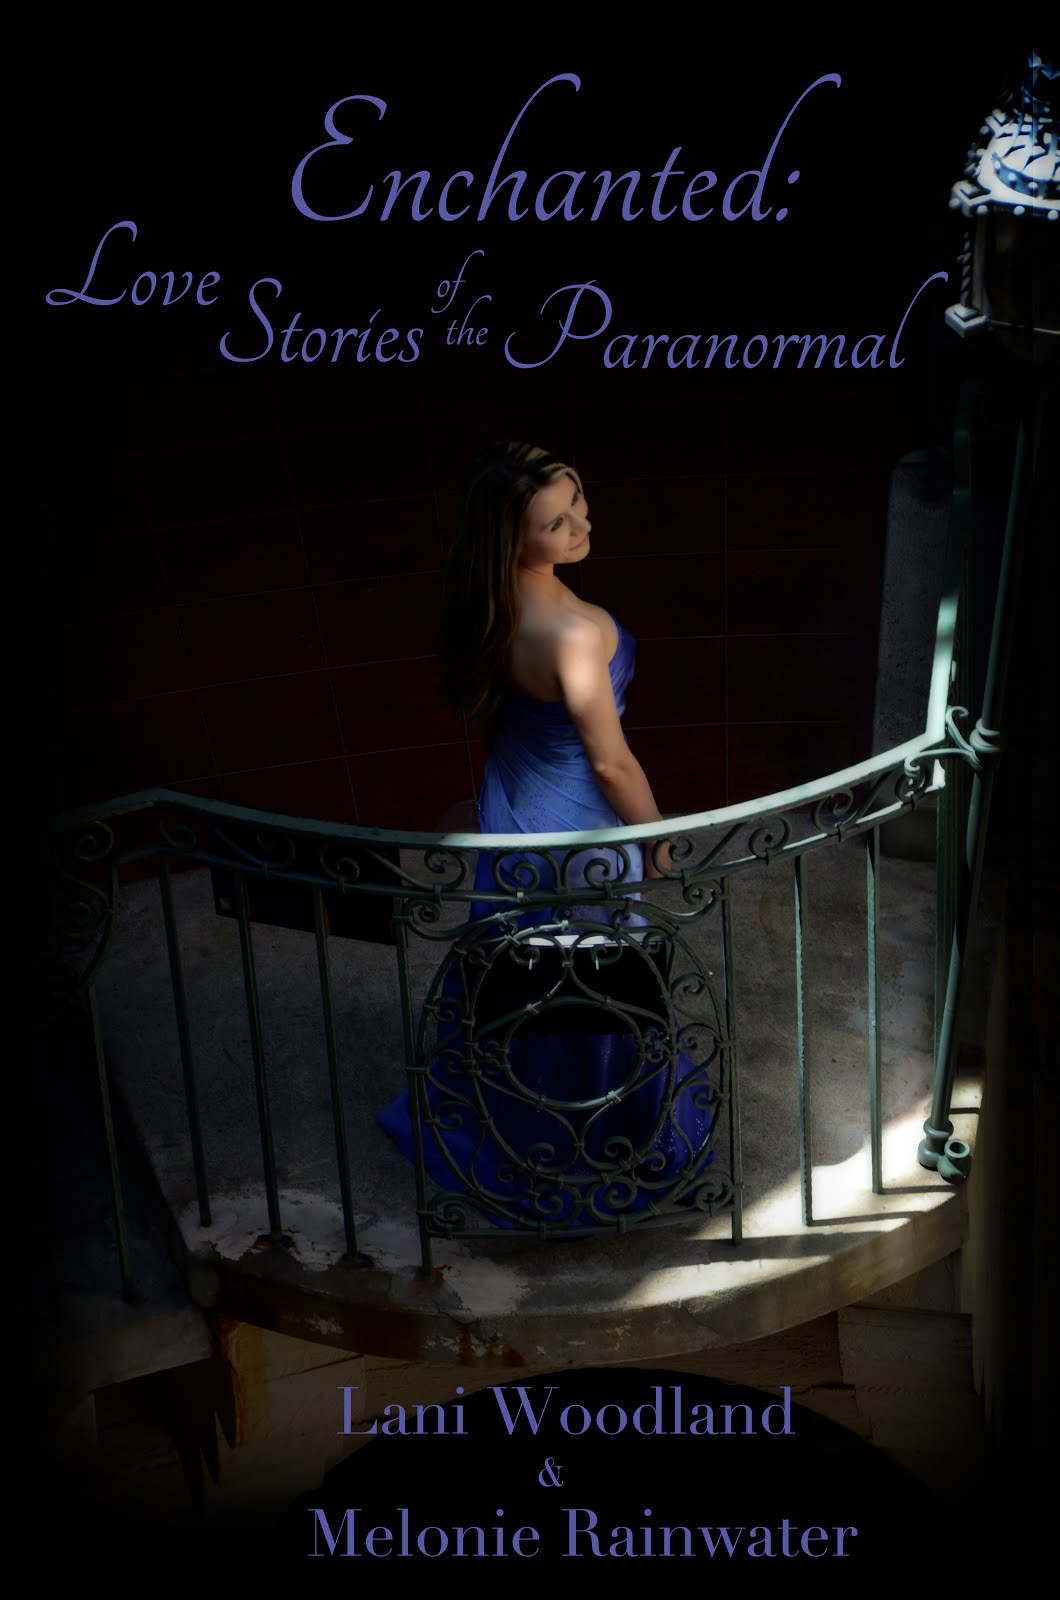 Enchanted: Love Stories of the Paranormal